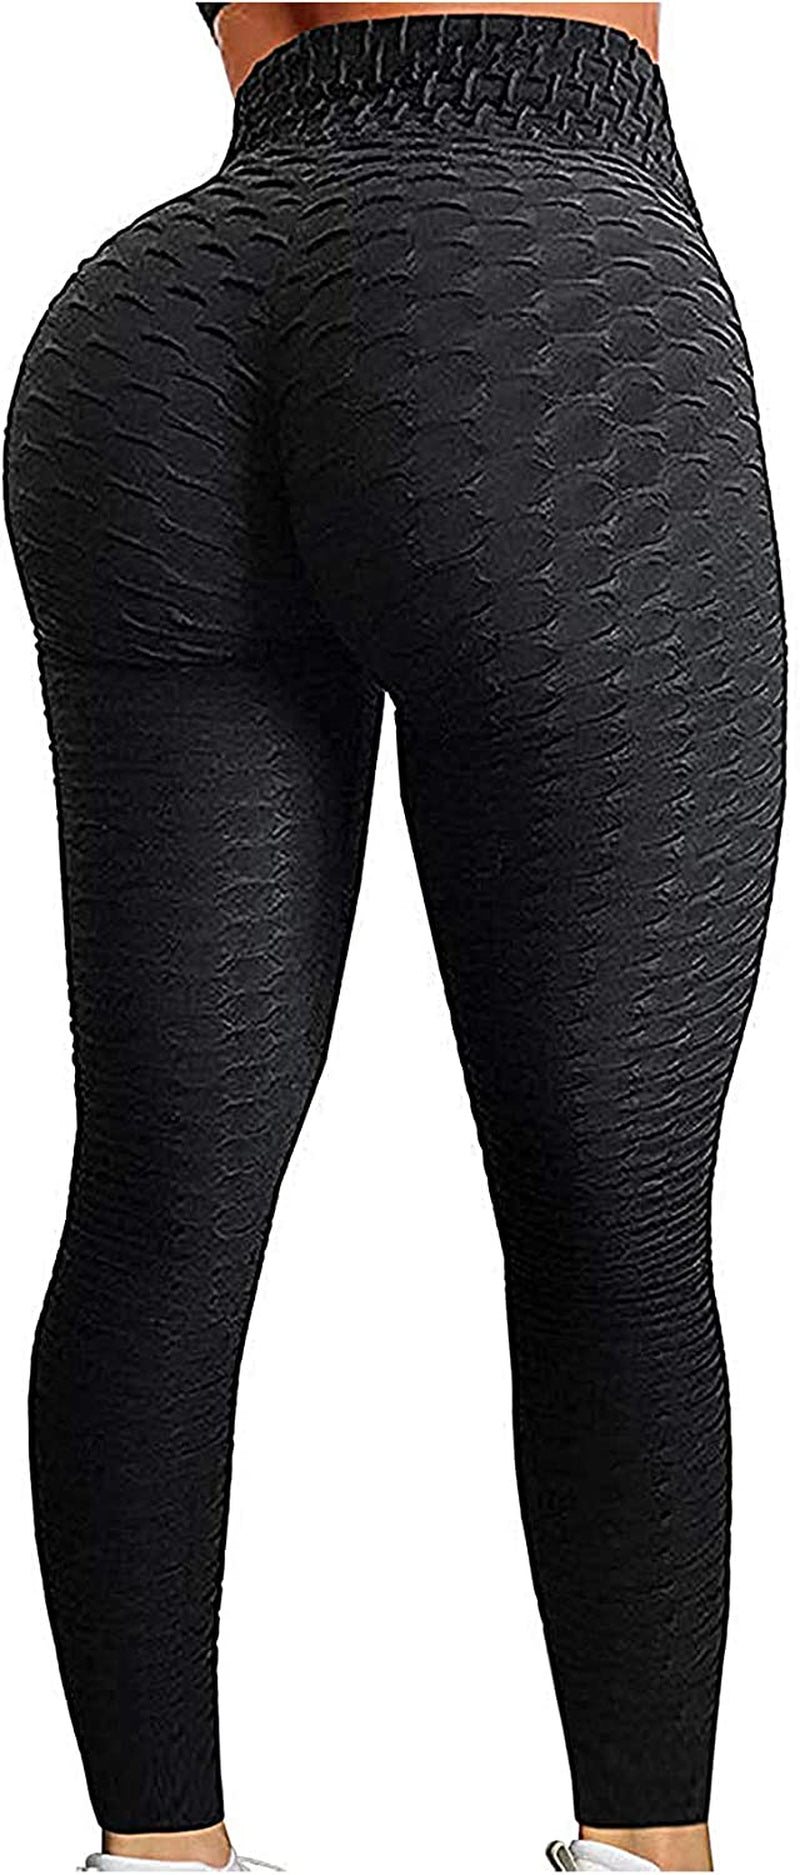 High Waisted Yoga Pants for Women - Butt Lift Leggings with Tummy Control